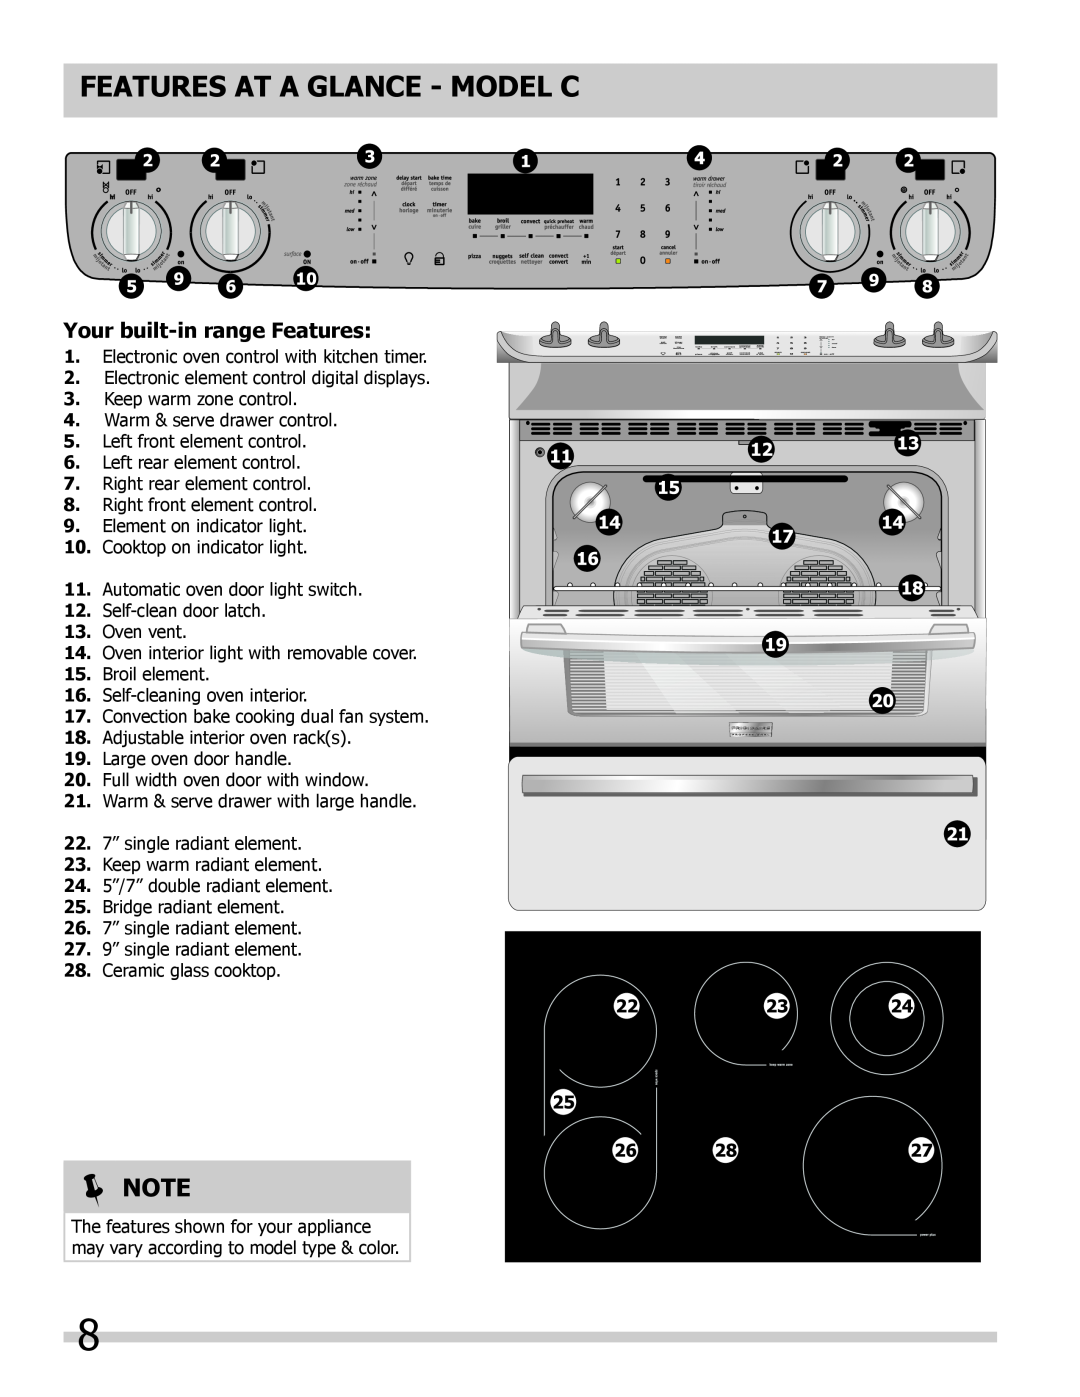 Frigidaire 318205804 manual FEATURES AT A GLANCE - mODEL C,  Note, Your built-in range Features 